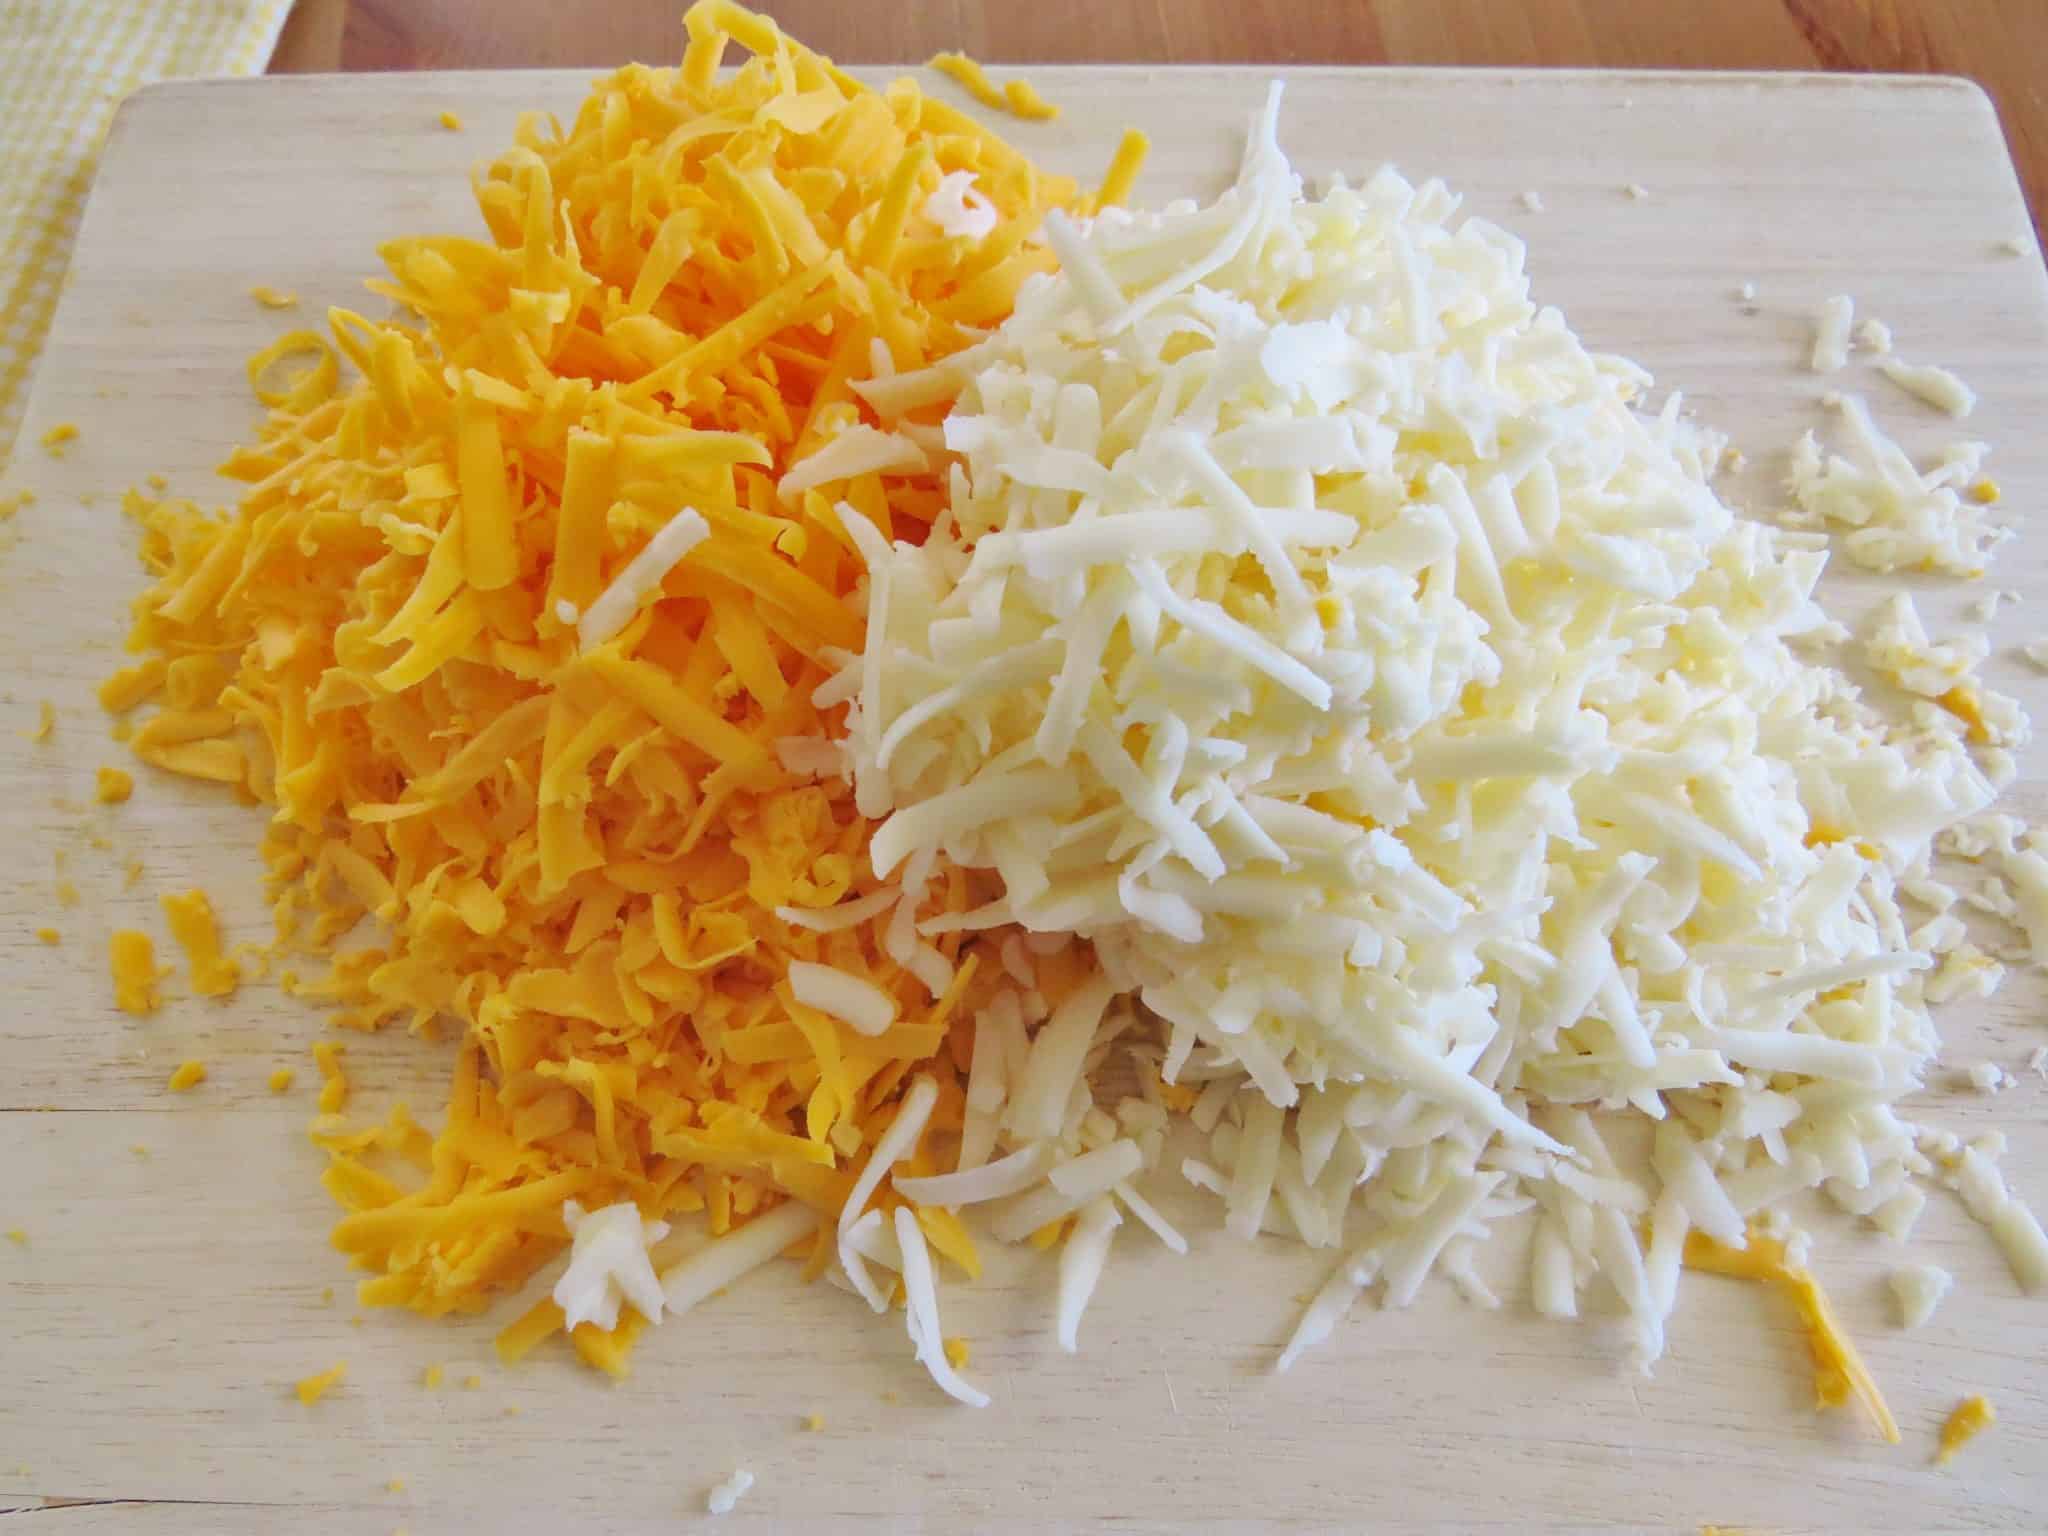 shredded cheddar and Monterey Jack cheeses on a cutting board.